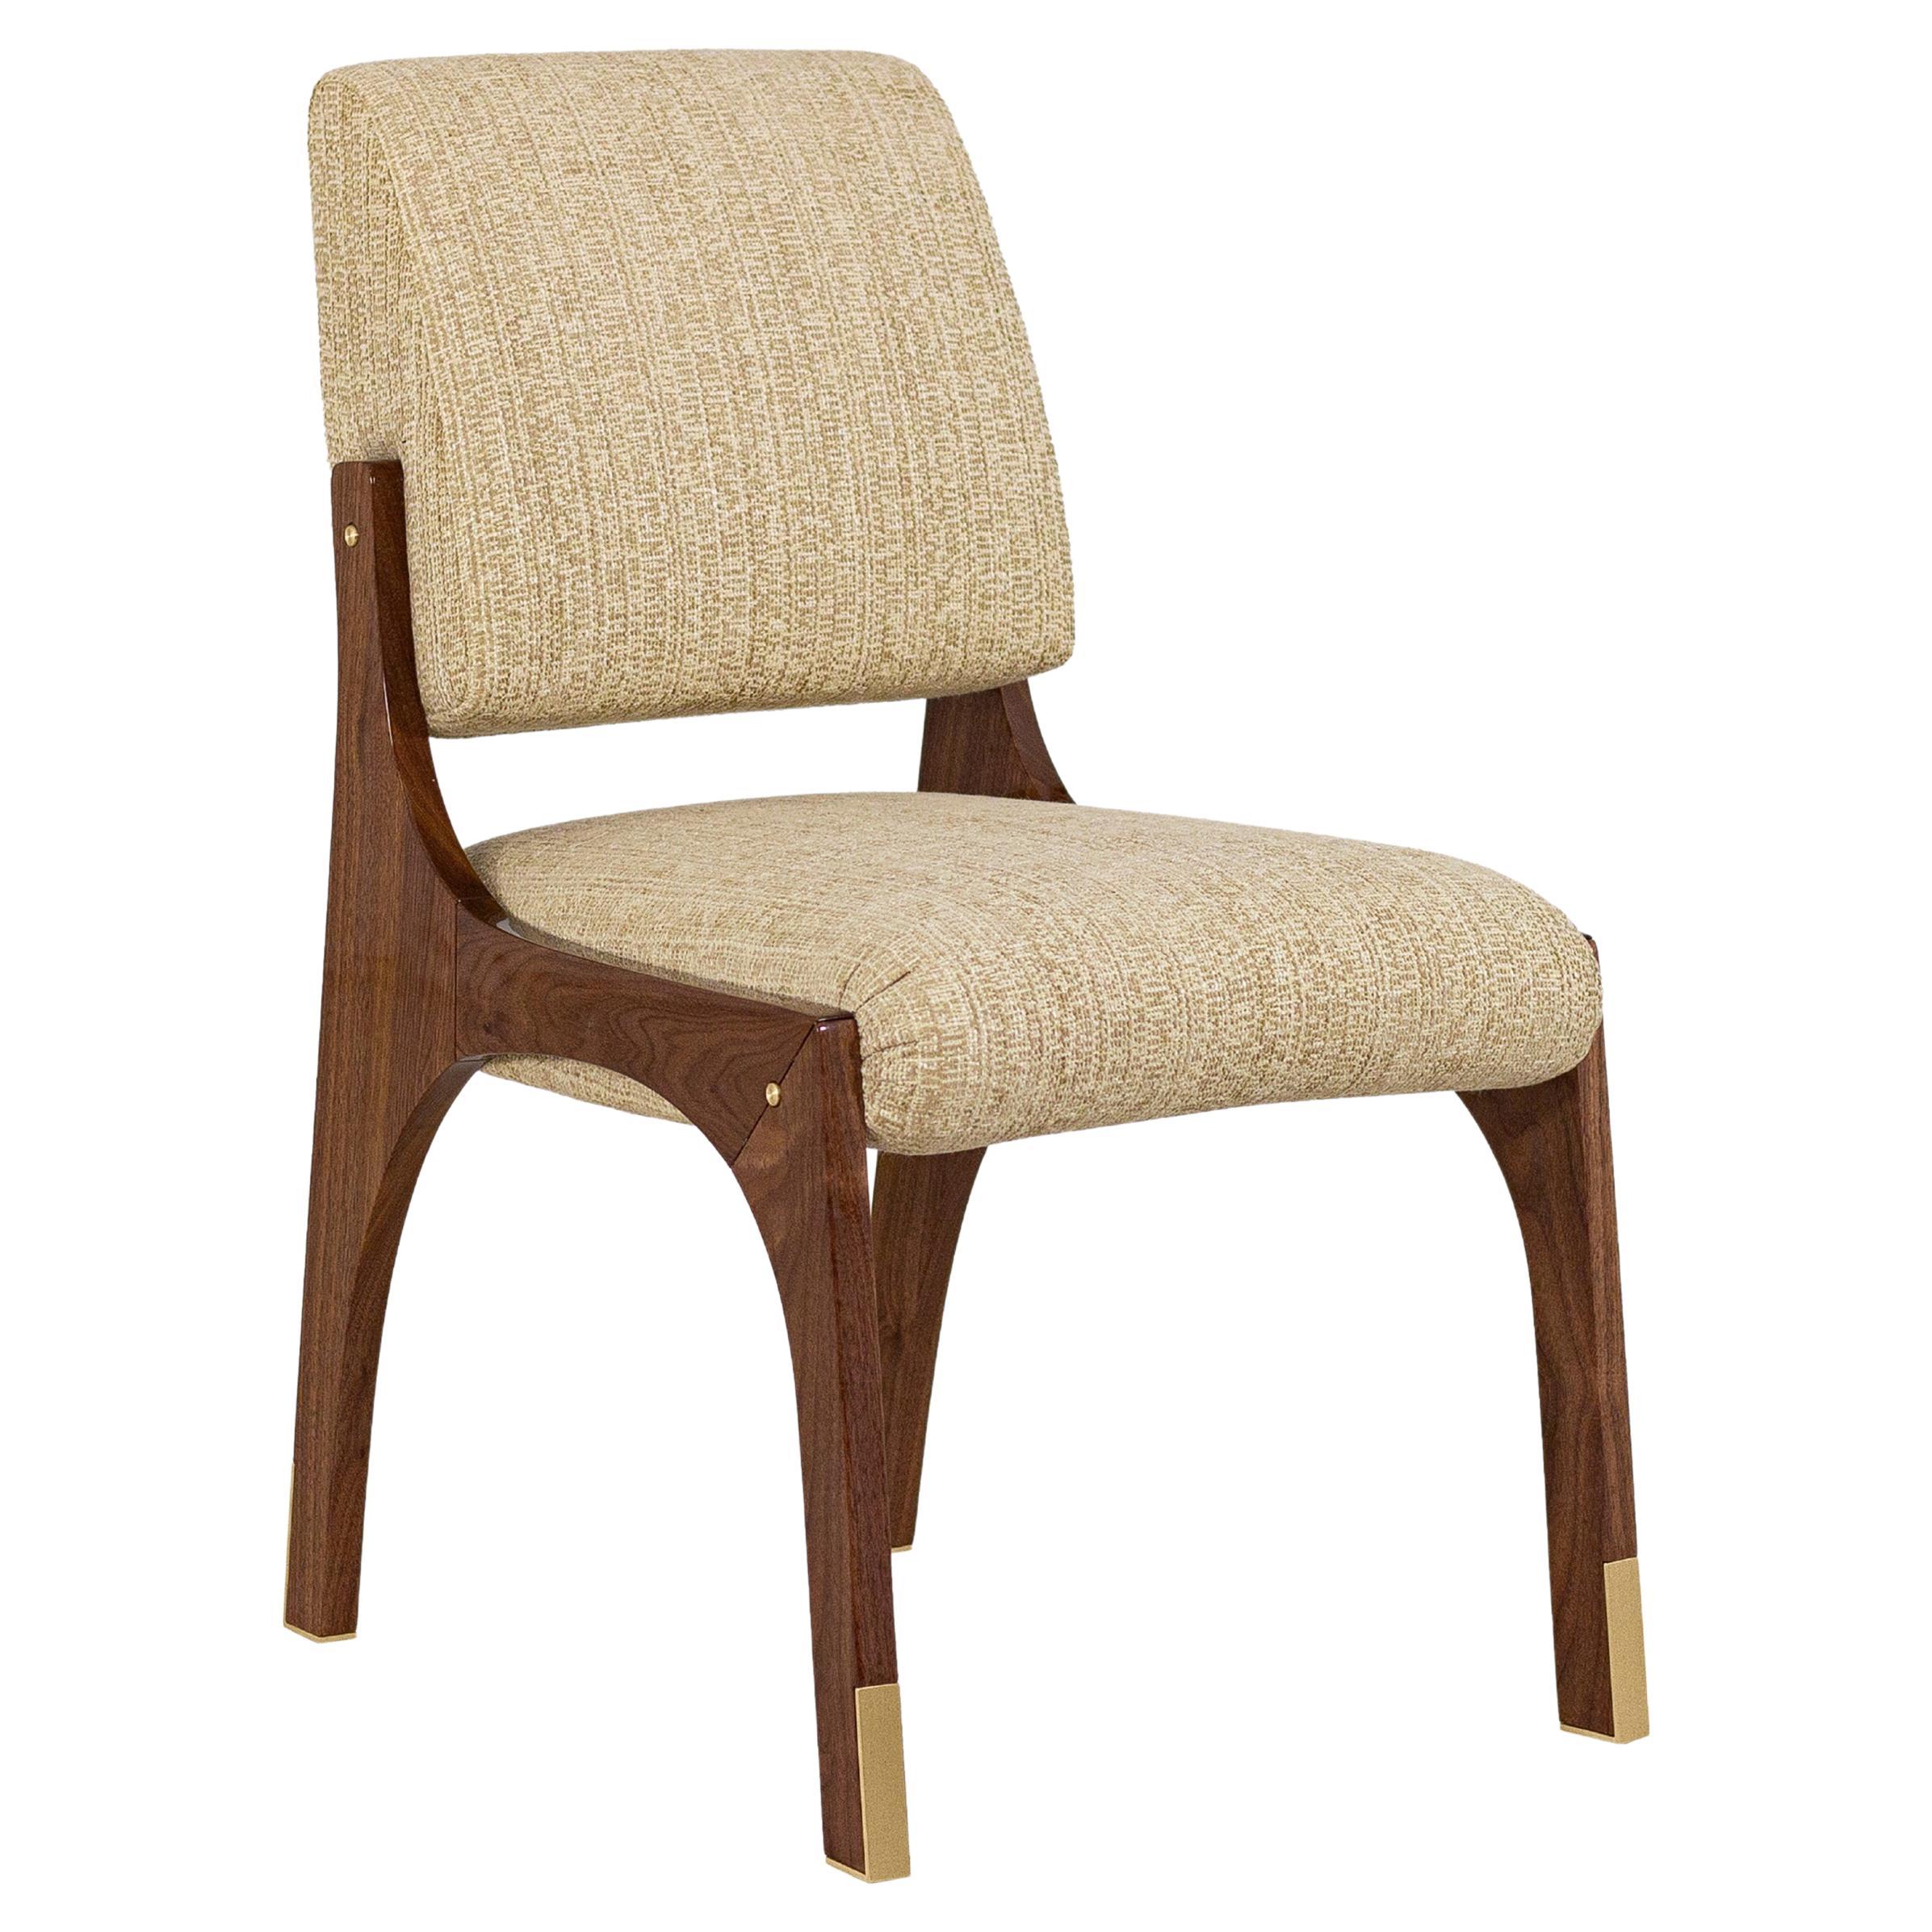 Arches II Dining Chair, Walnut & Brass, InsidherLand by Joana Santos Barbosa For Sale